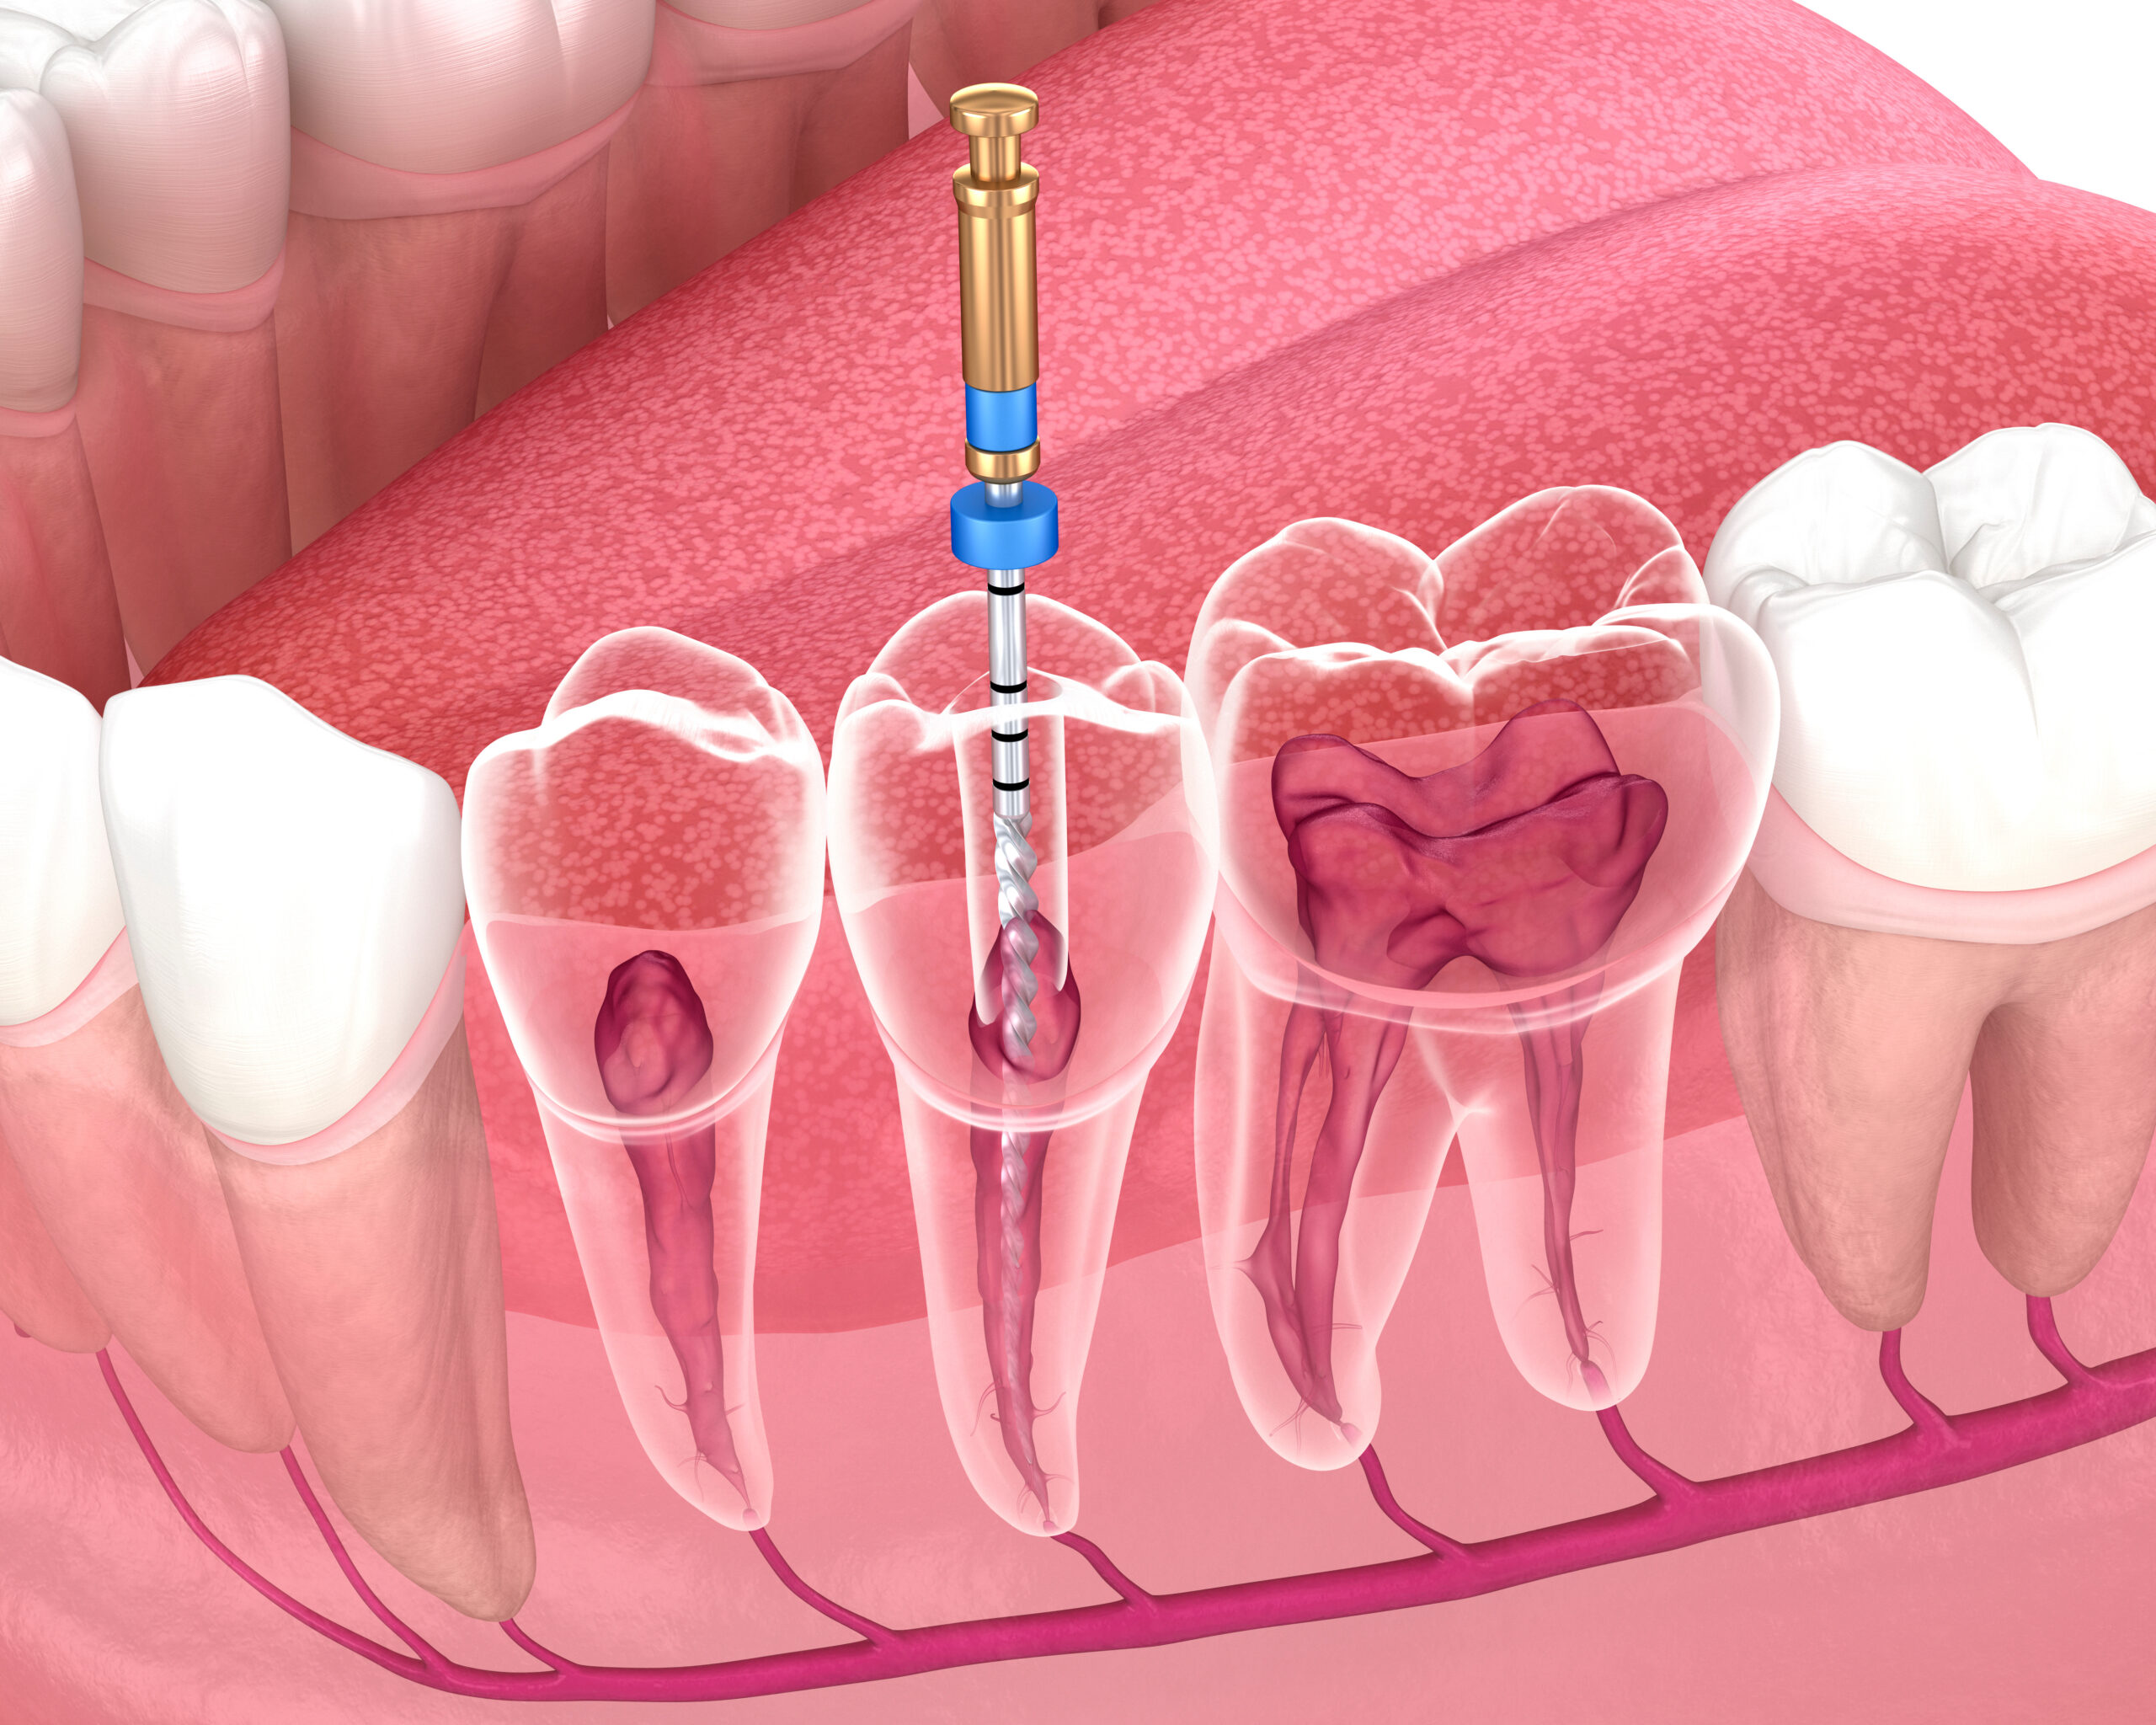 syosset root canal treatment